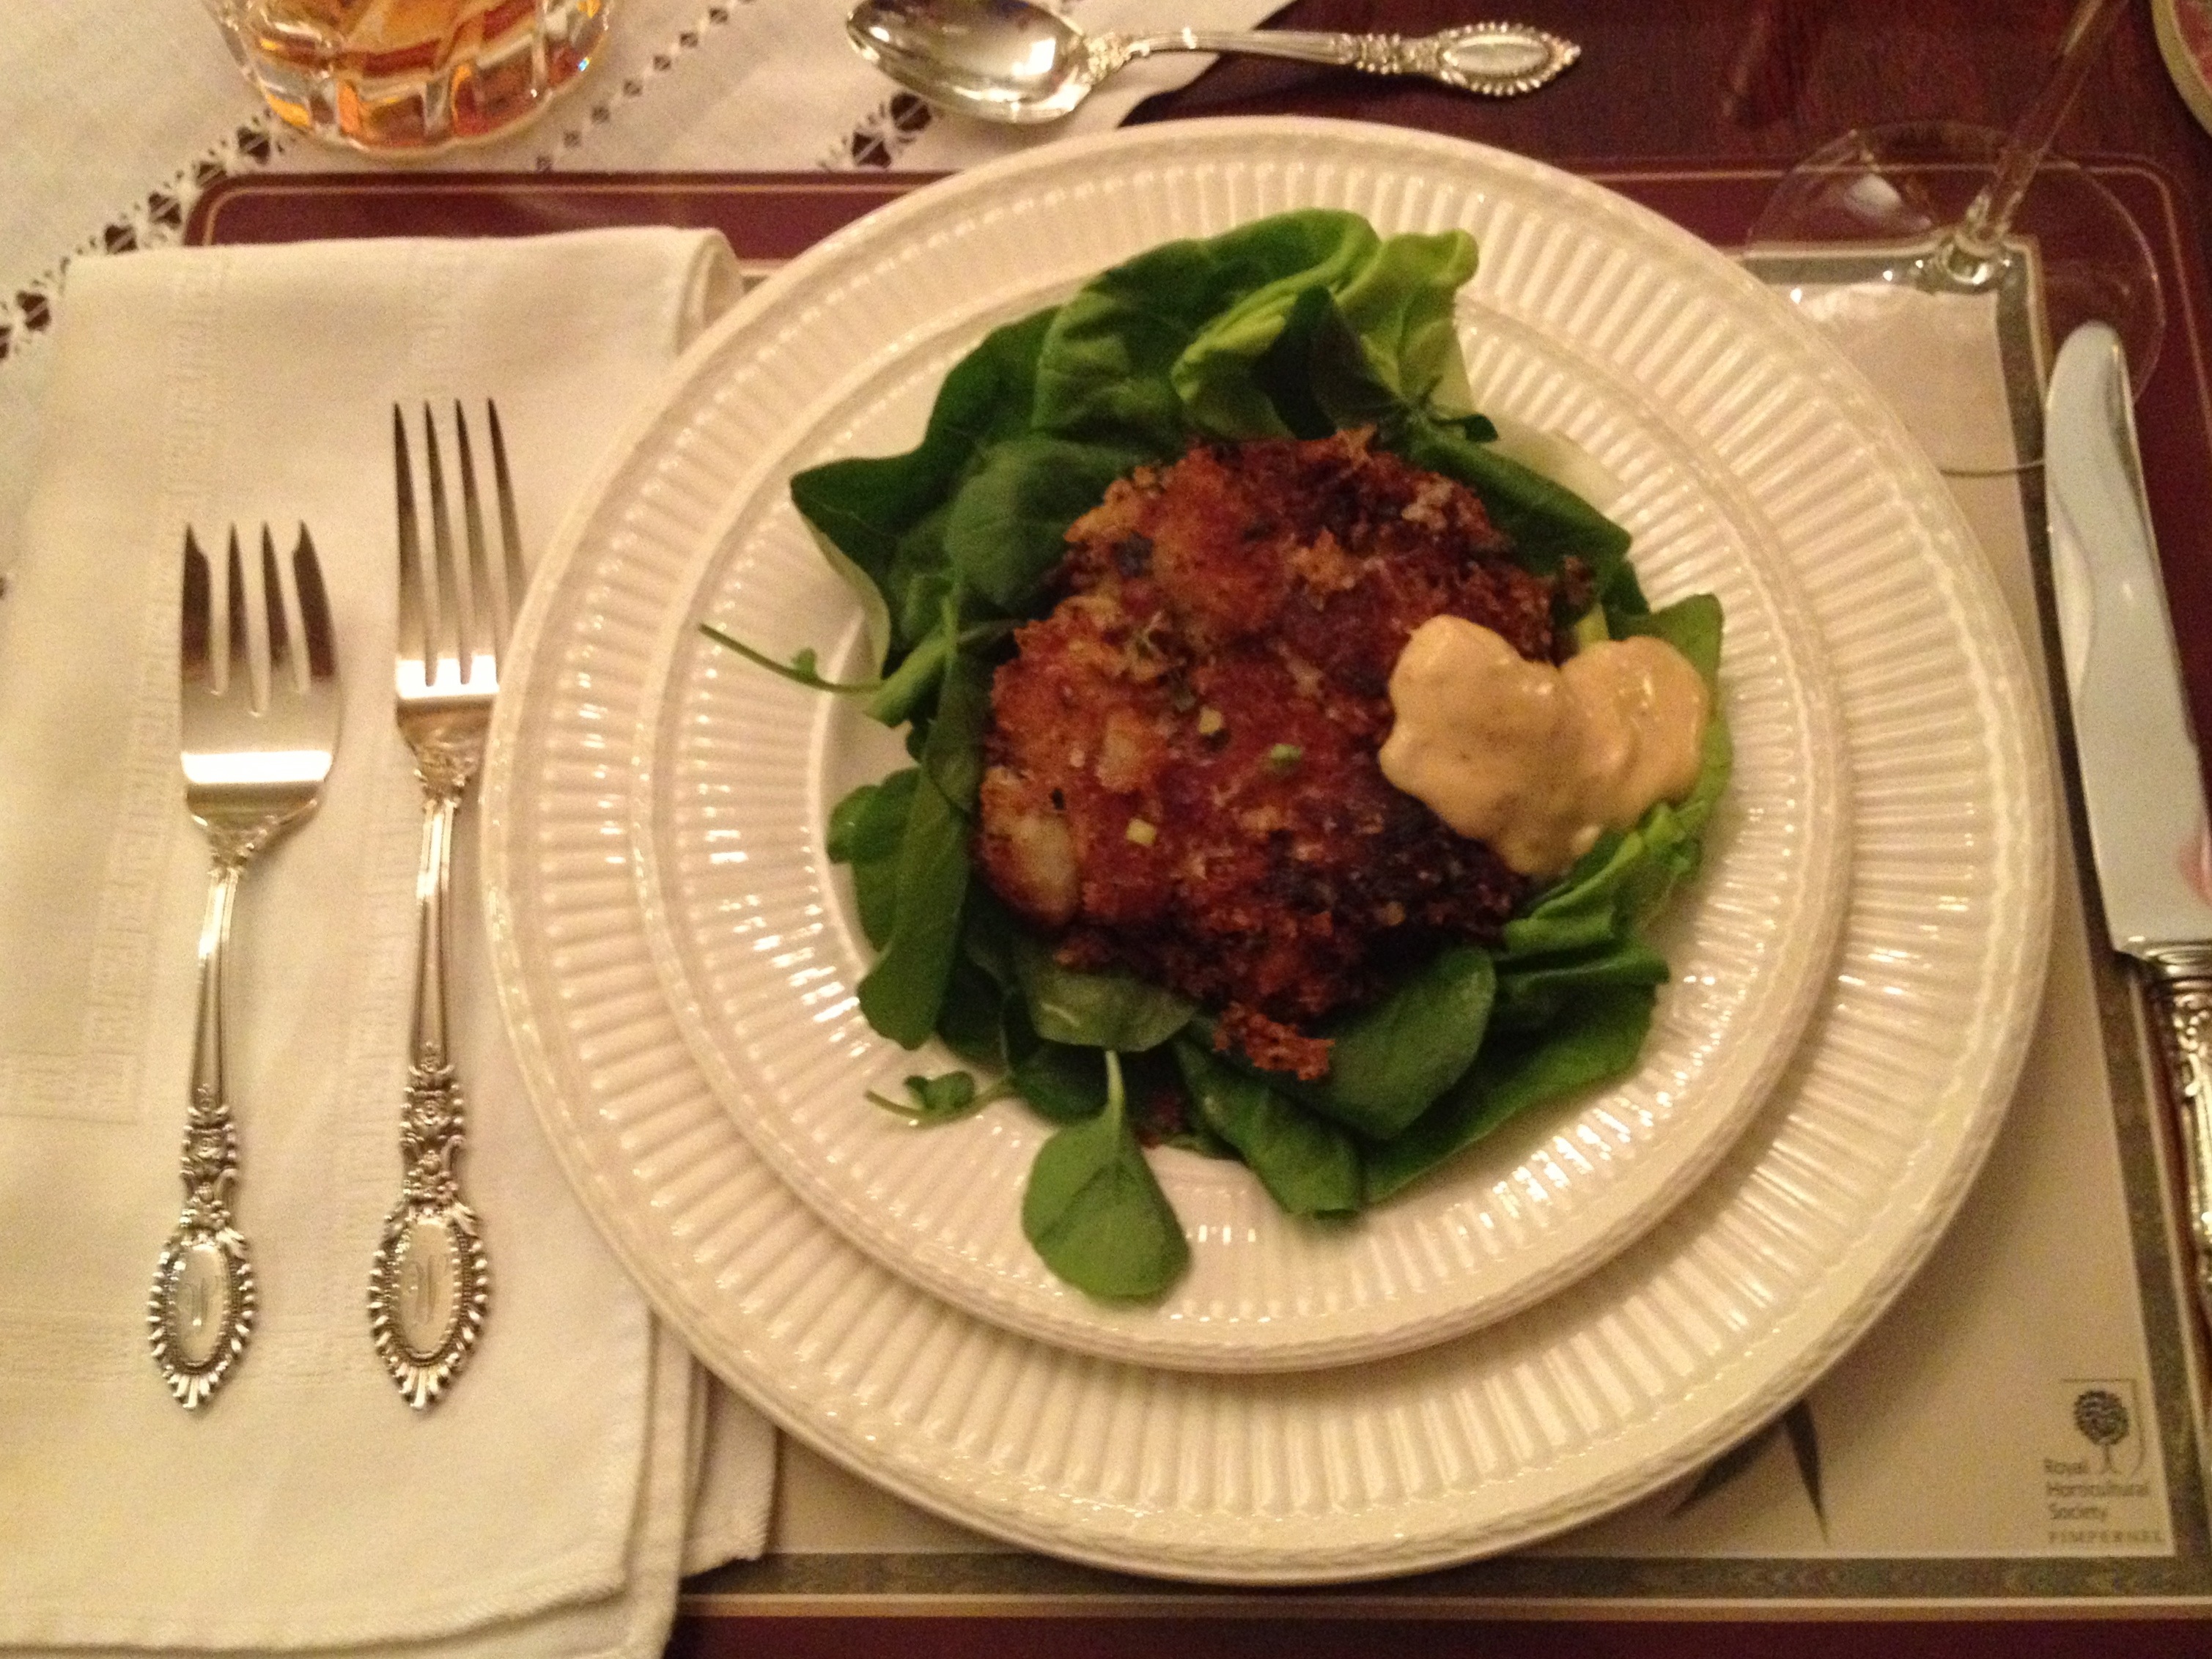 Crab cakes and lettuce on white dinner plates.